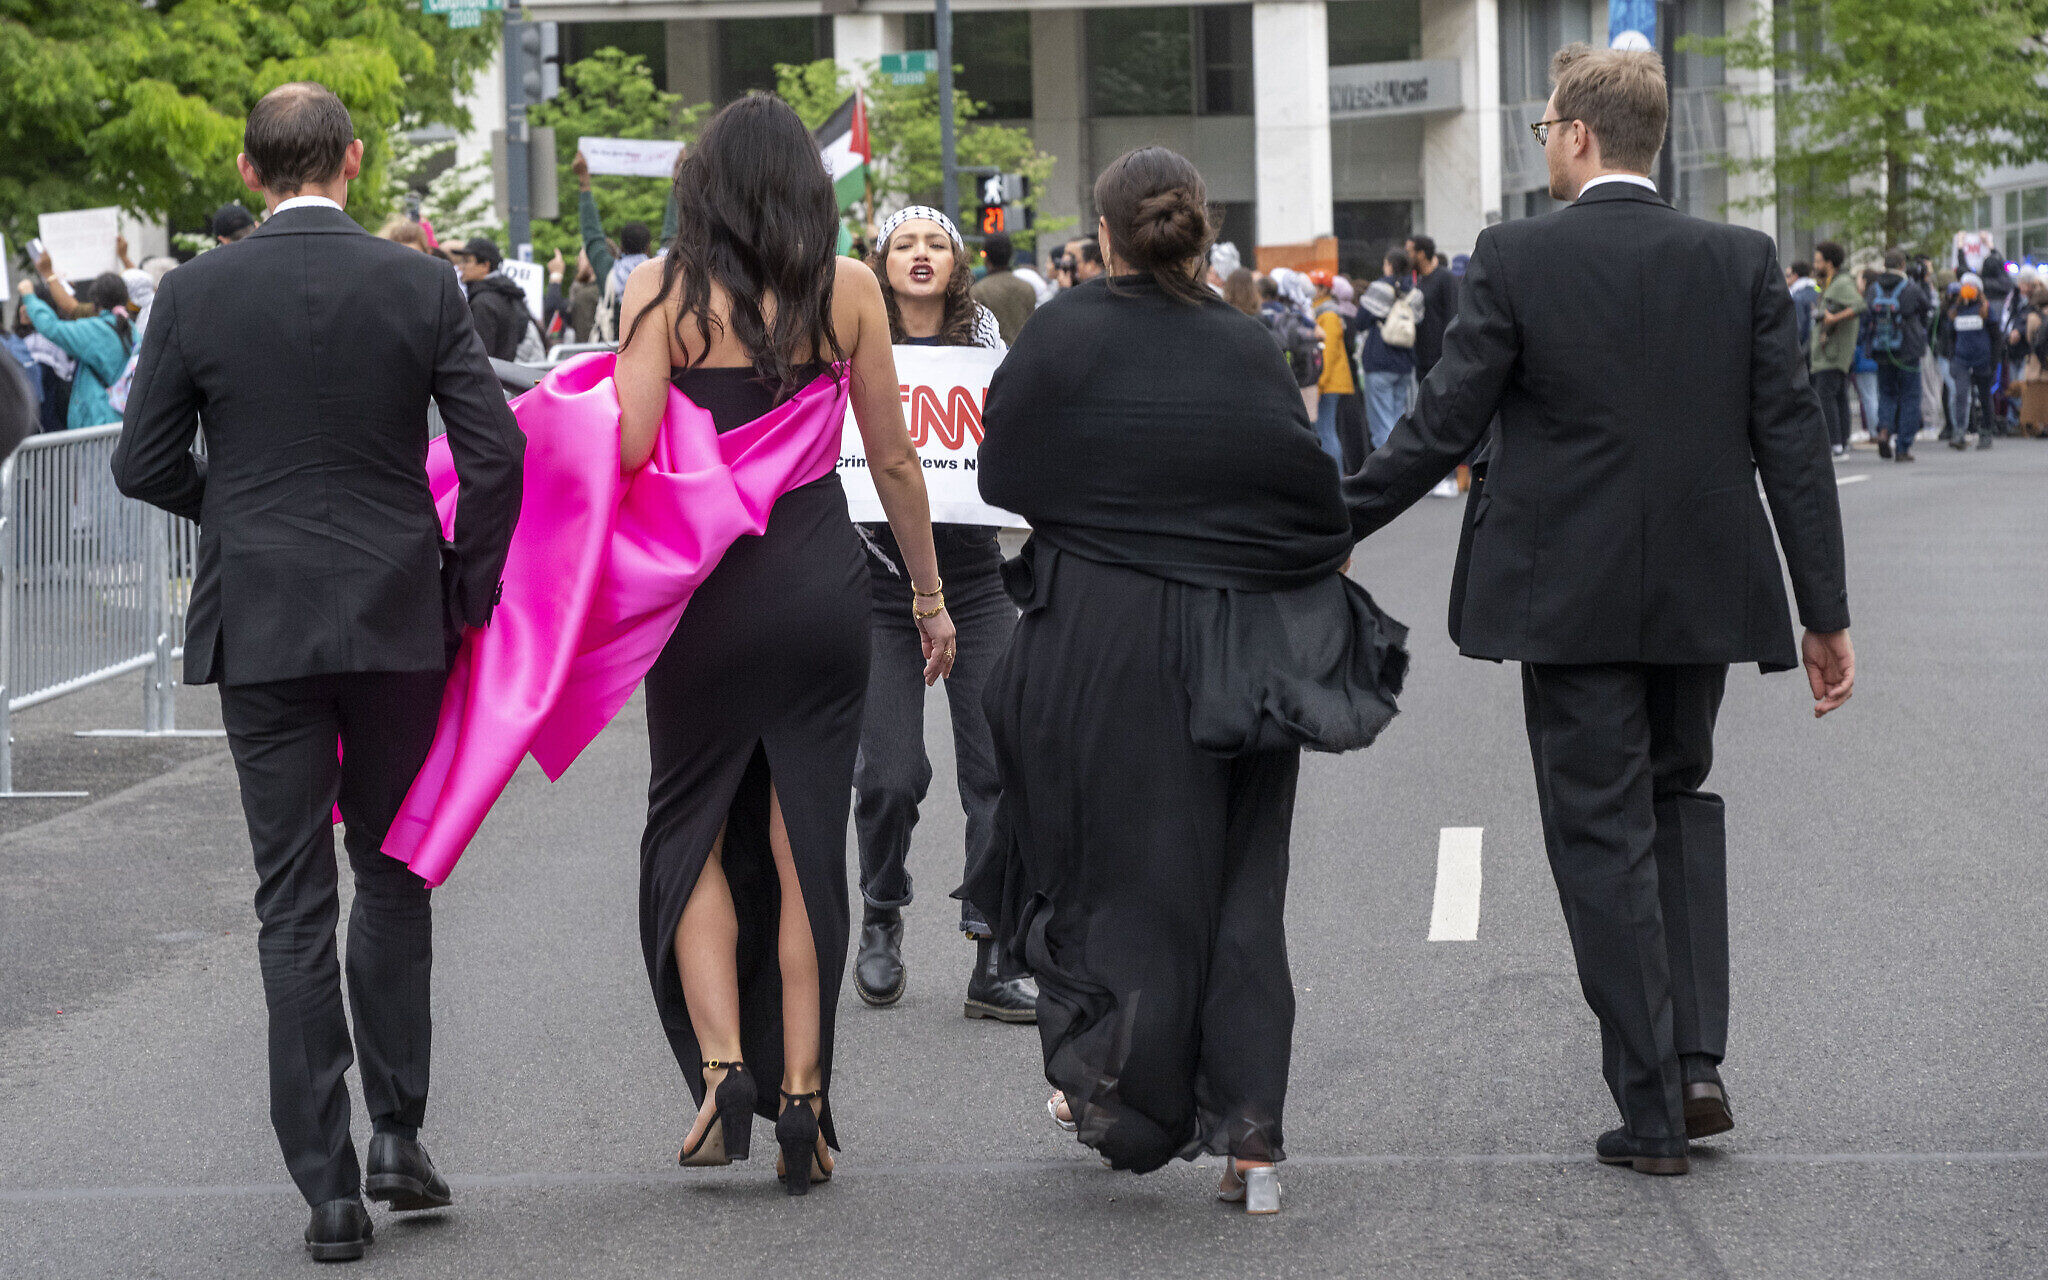 Guests arriving to White House correspondents' dinner greeted by anti